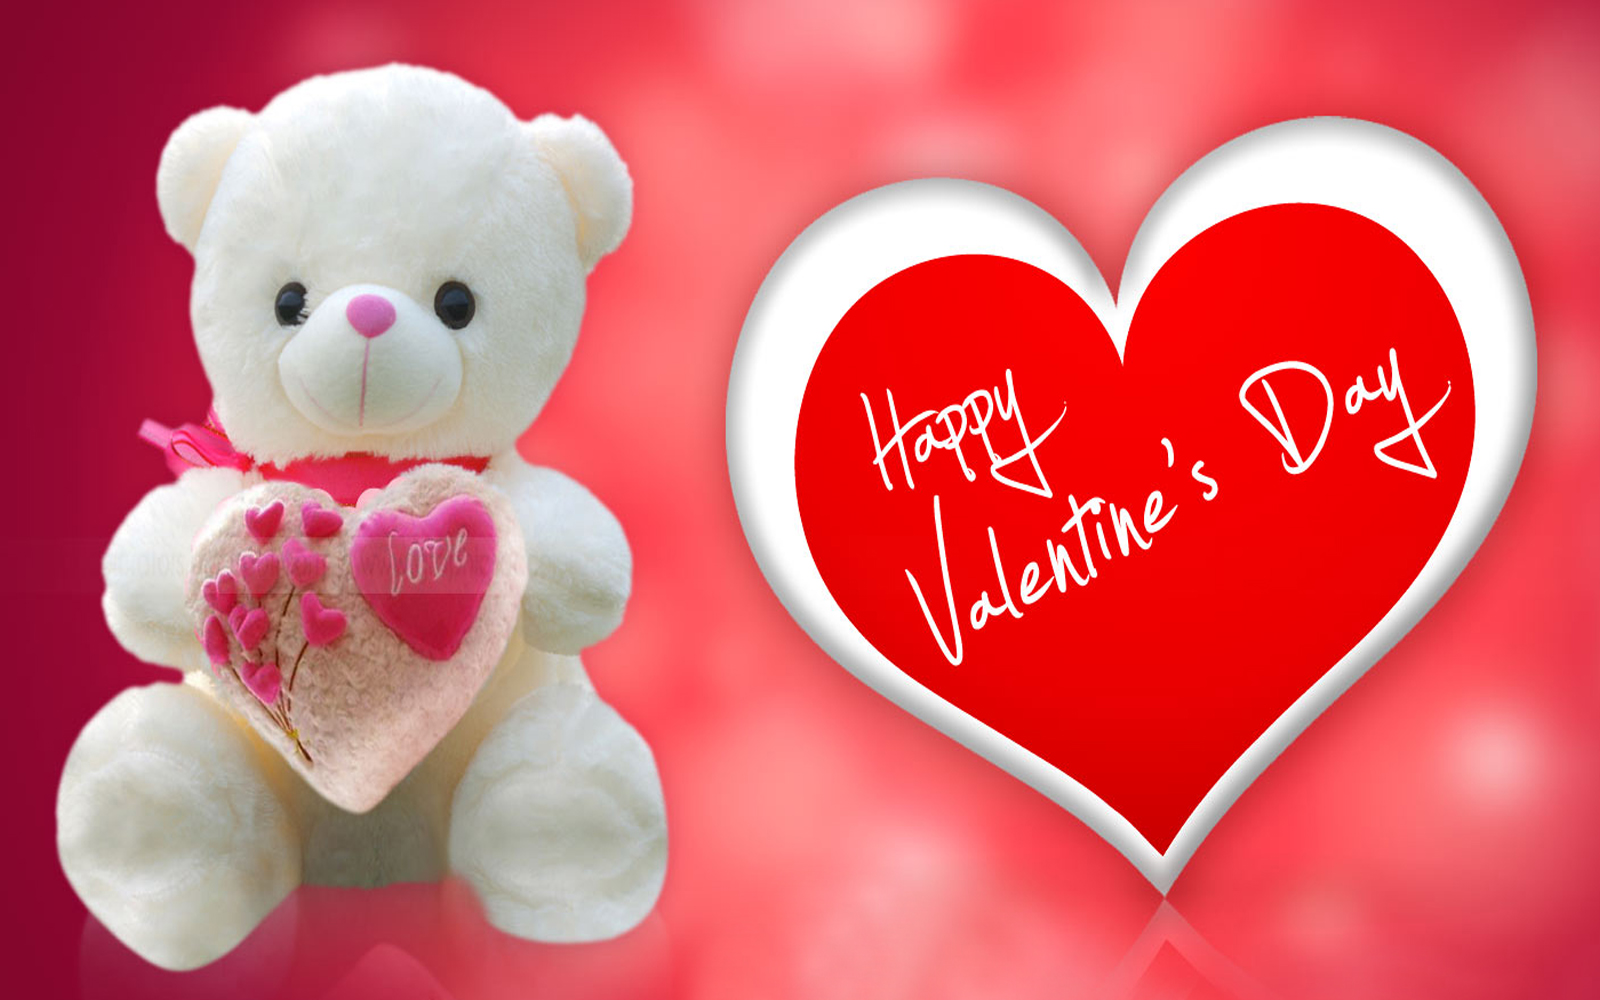 Happy valentines day Images with a white cute teddy bear